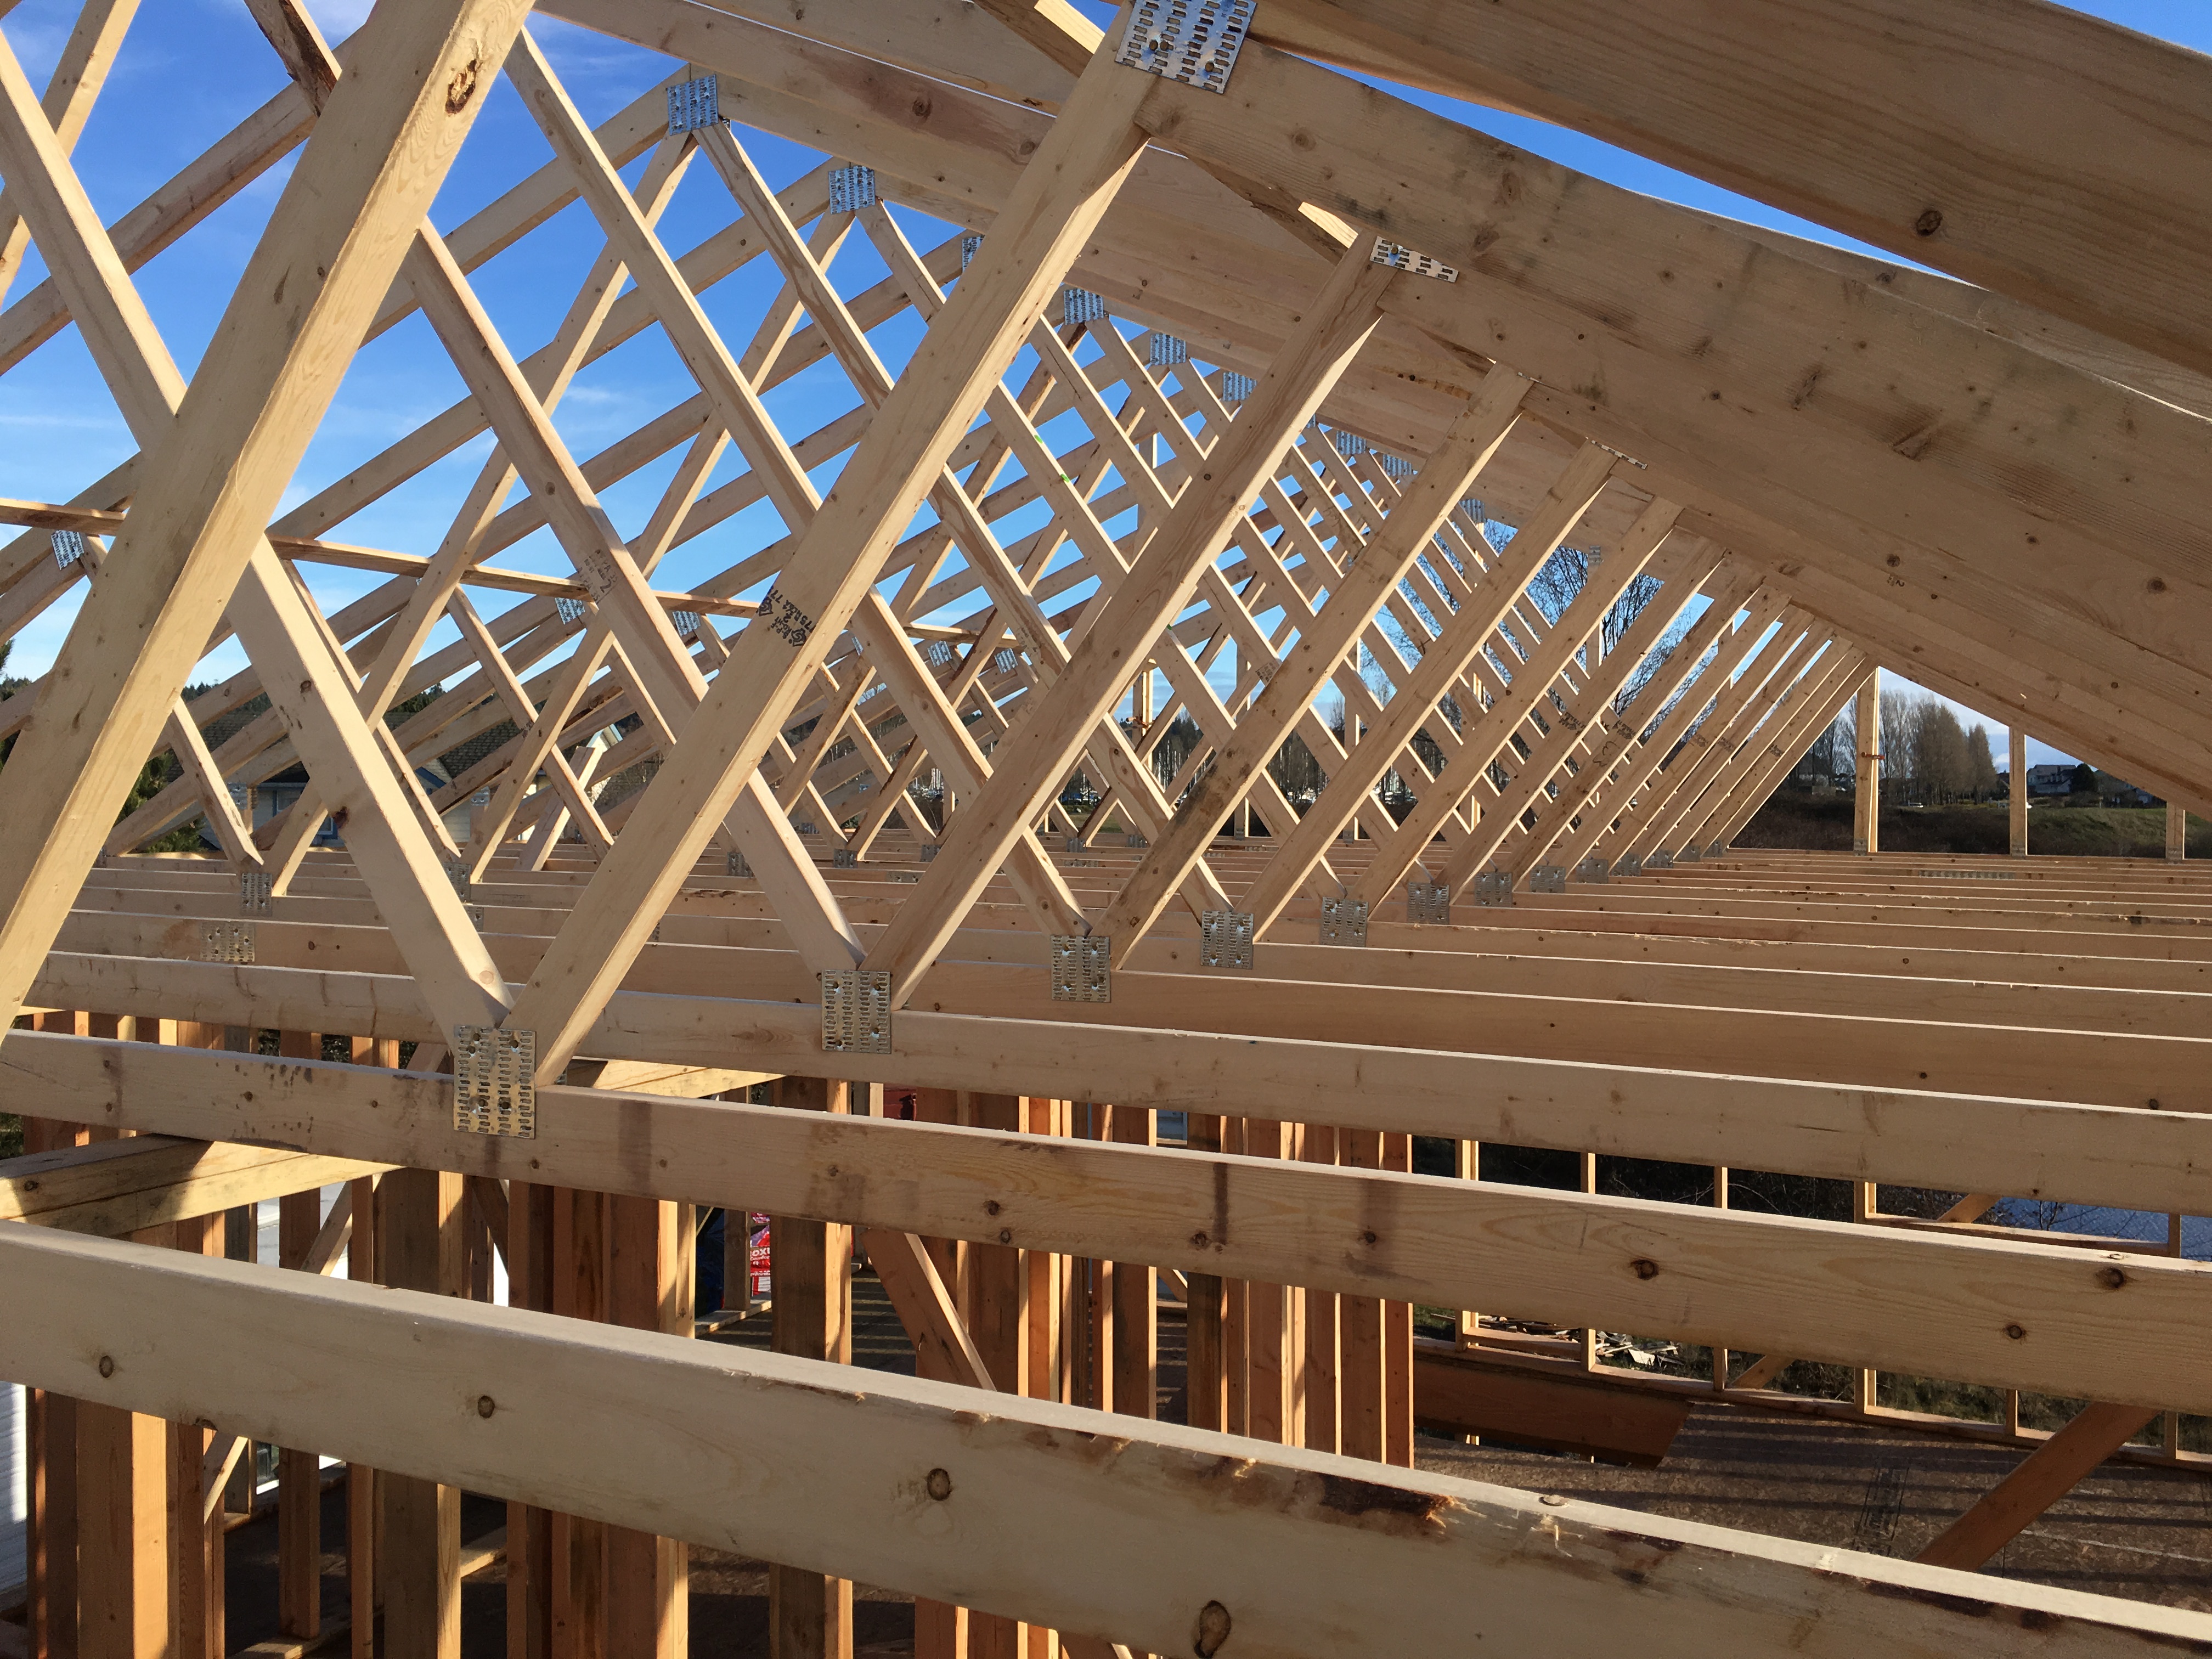 Step 11 – Install the Roof Frame